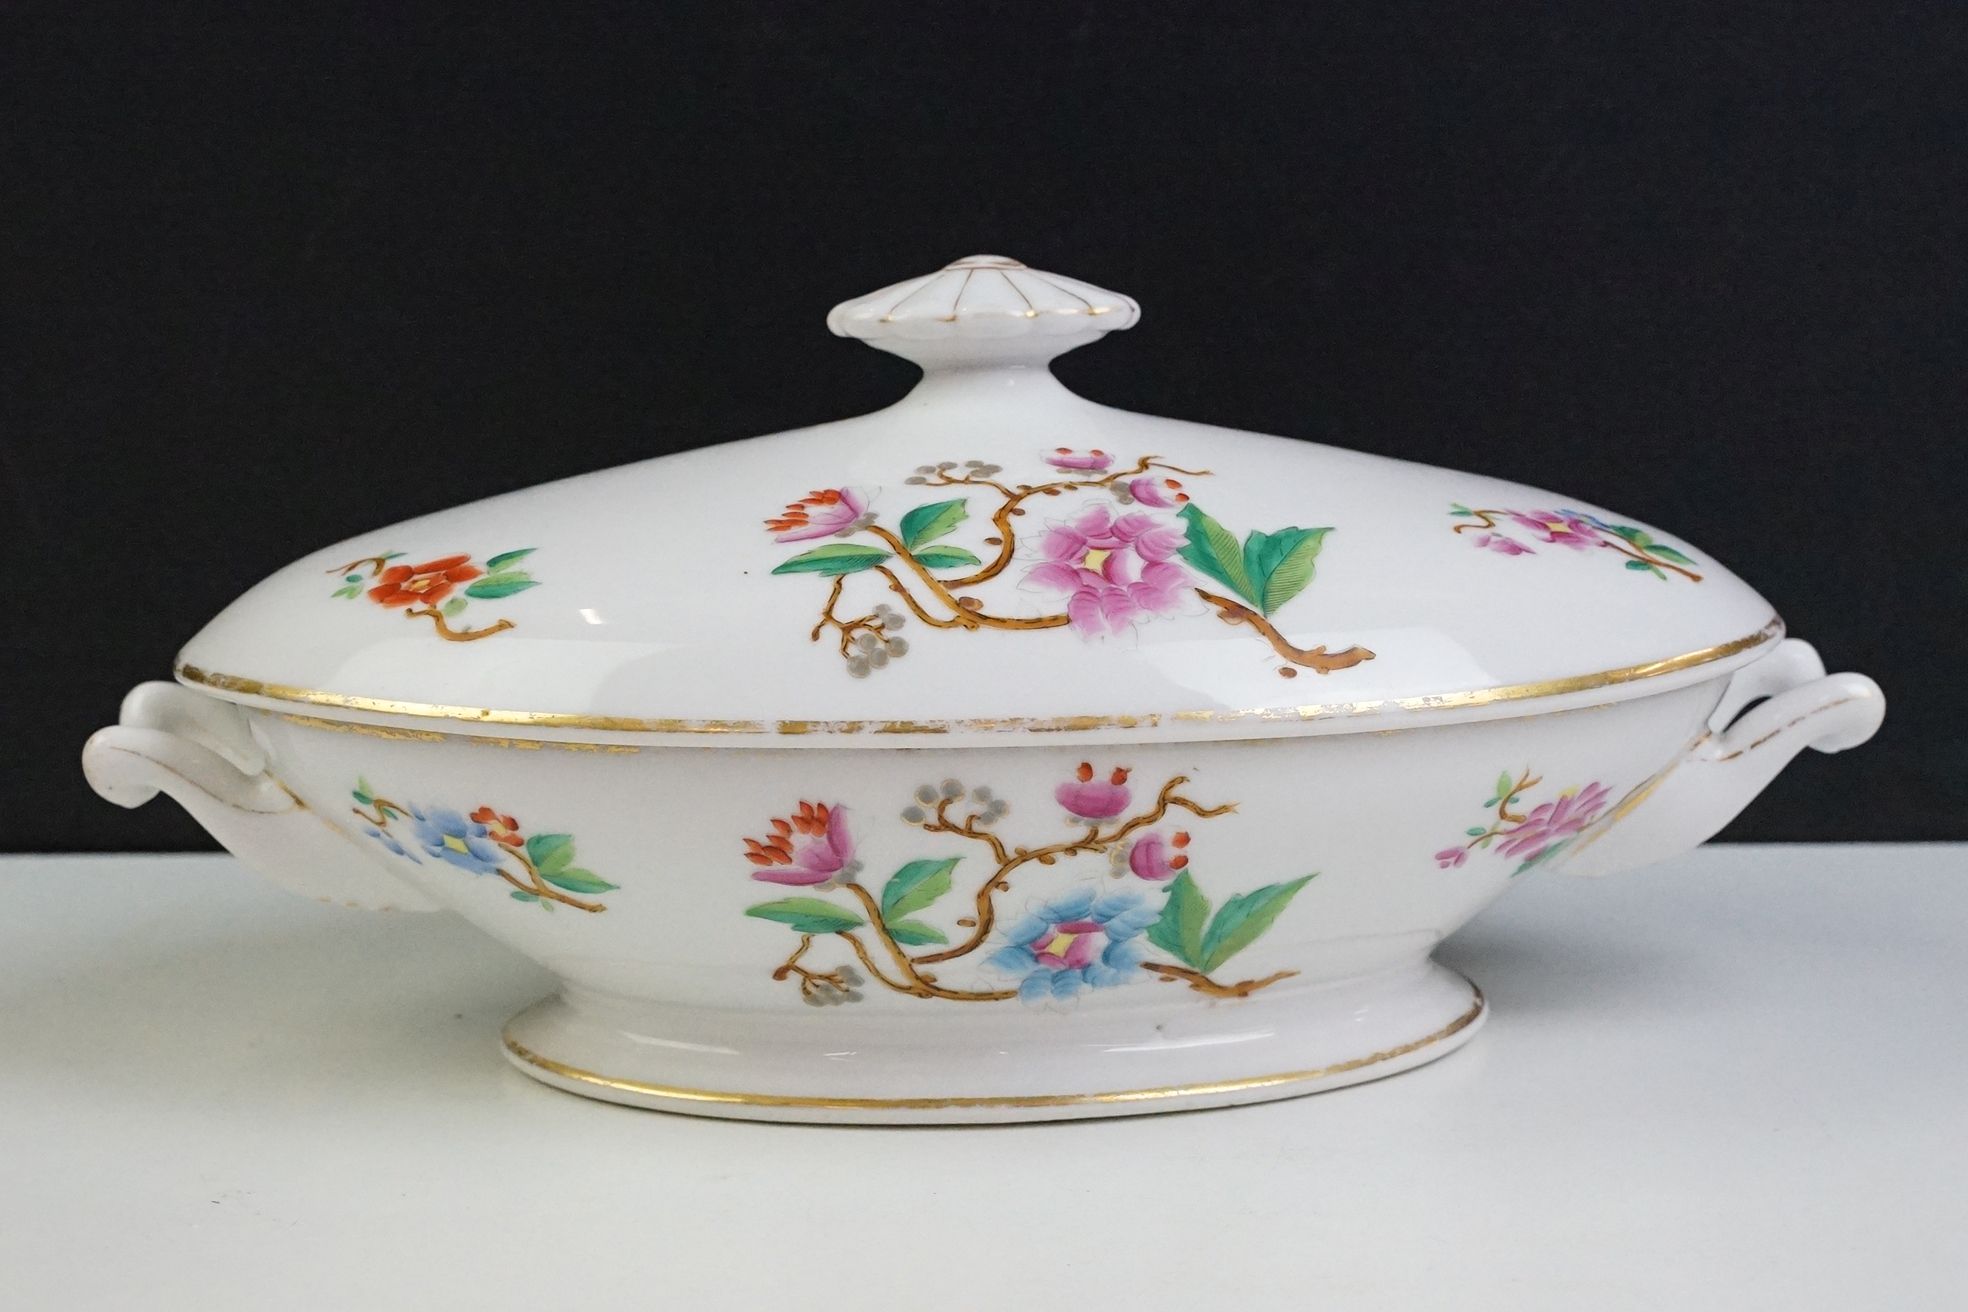 19th Century white ceramic large footed serving tureen with hand coloured floral decoration - Image 7 of 9